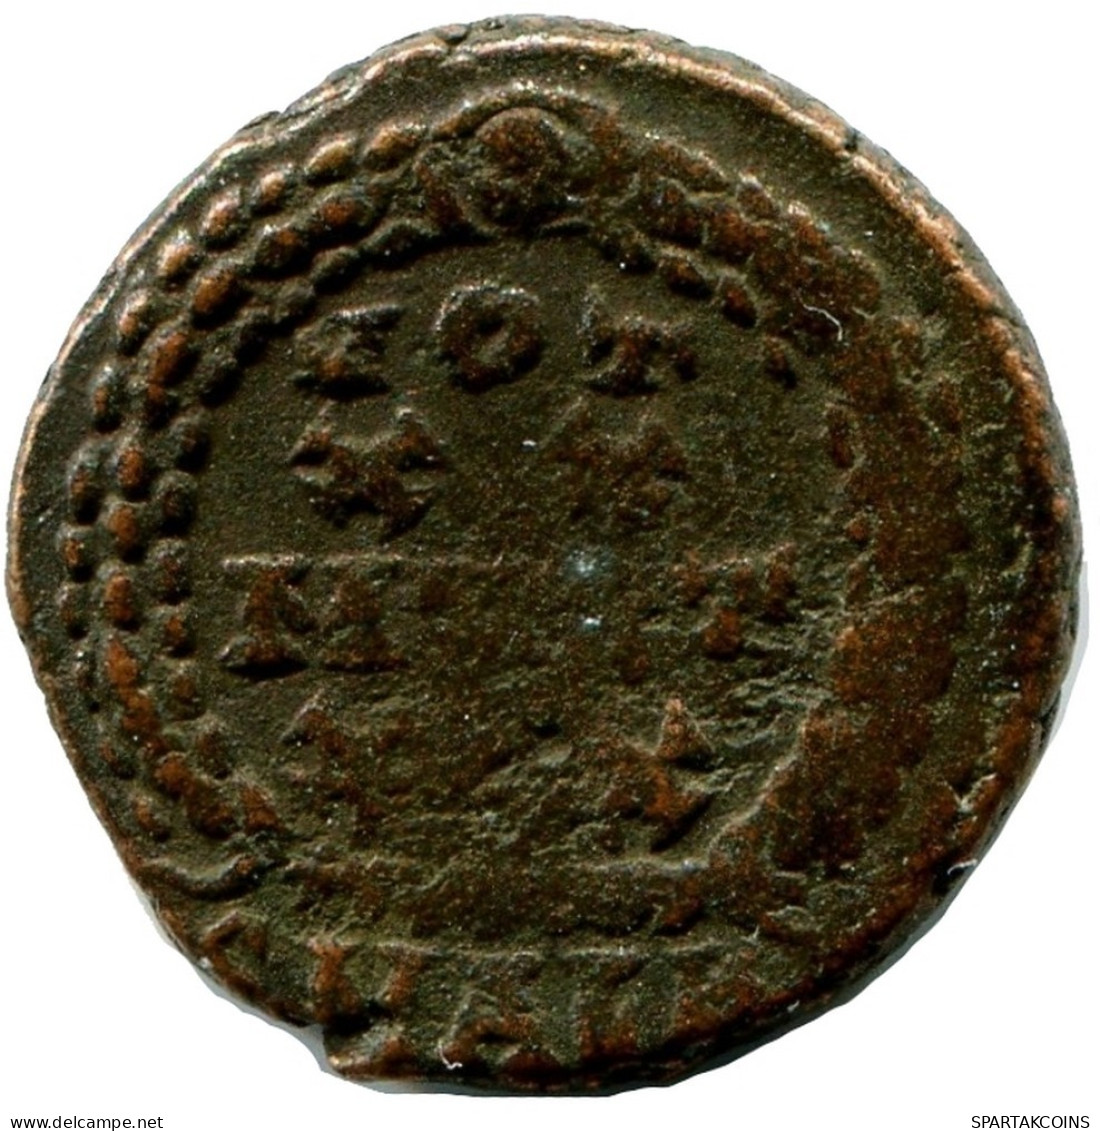 CONSTANS MINTED IN ALEKSANDRIA FROM THE ROYAL ONTARIO MUSEUM #ANC11486.14.U.A - El Imperio Christiano (307 / 363)